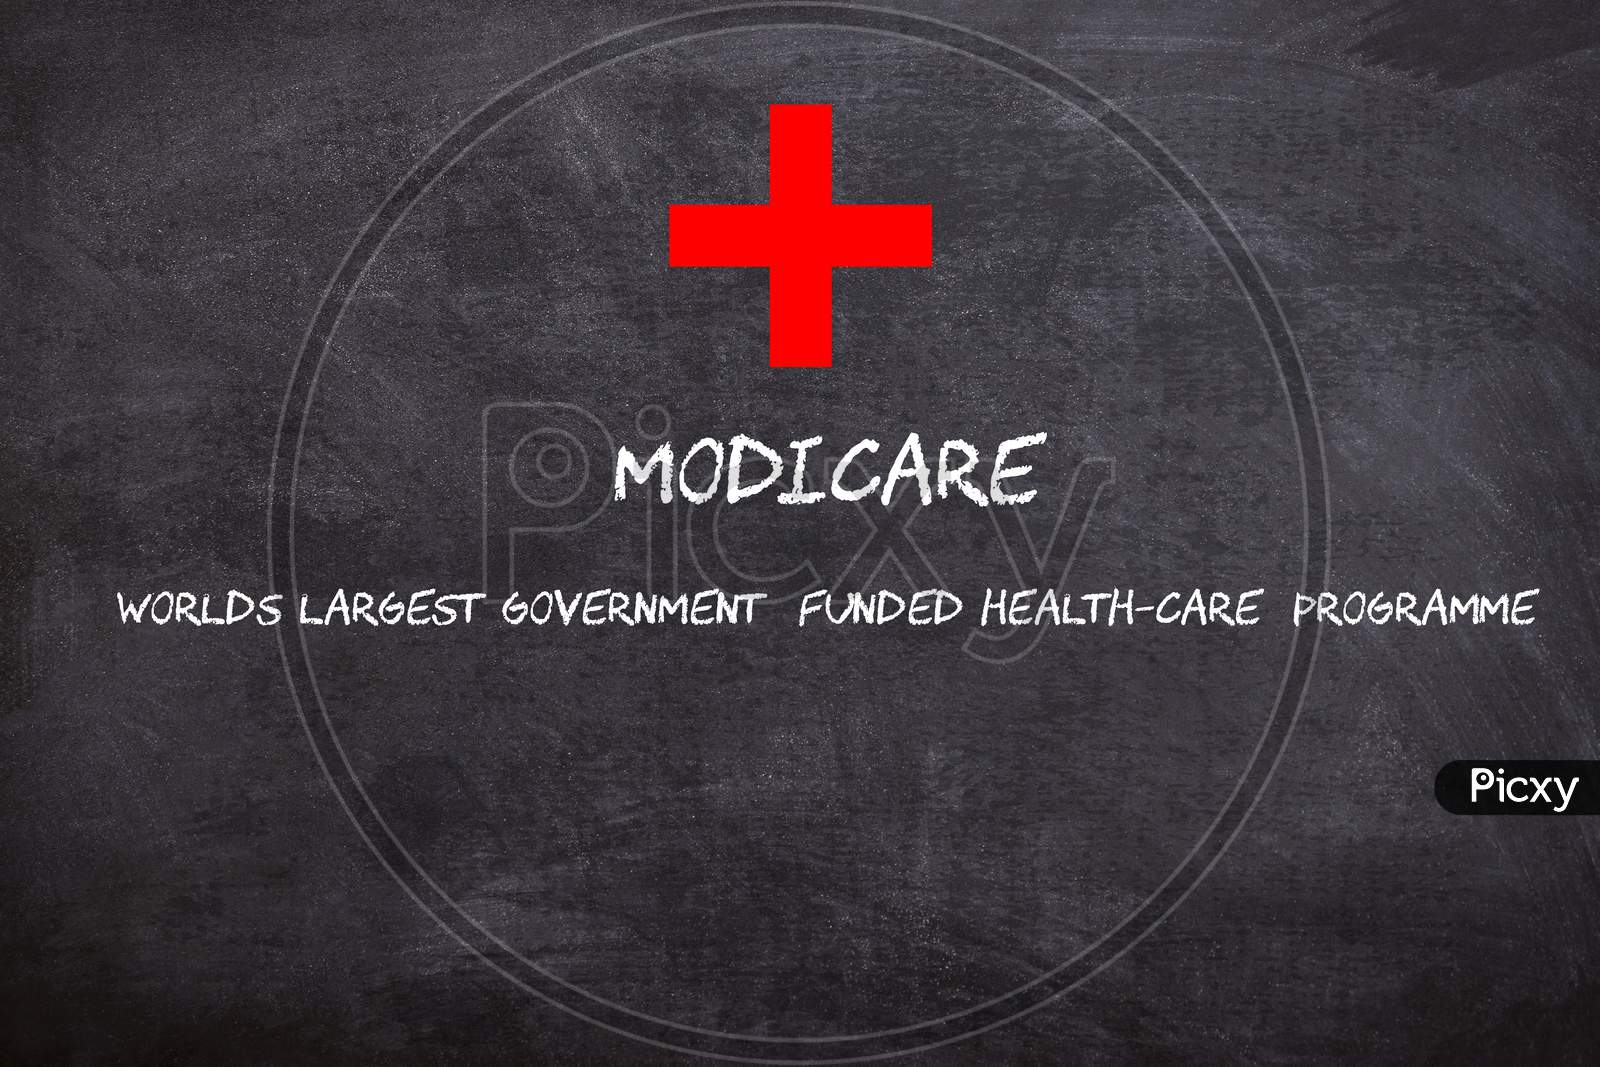 Modicare written on a Black Board with Medical Symbol